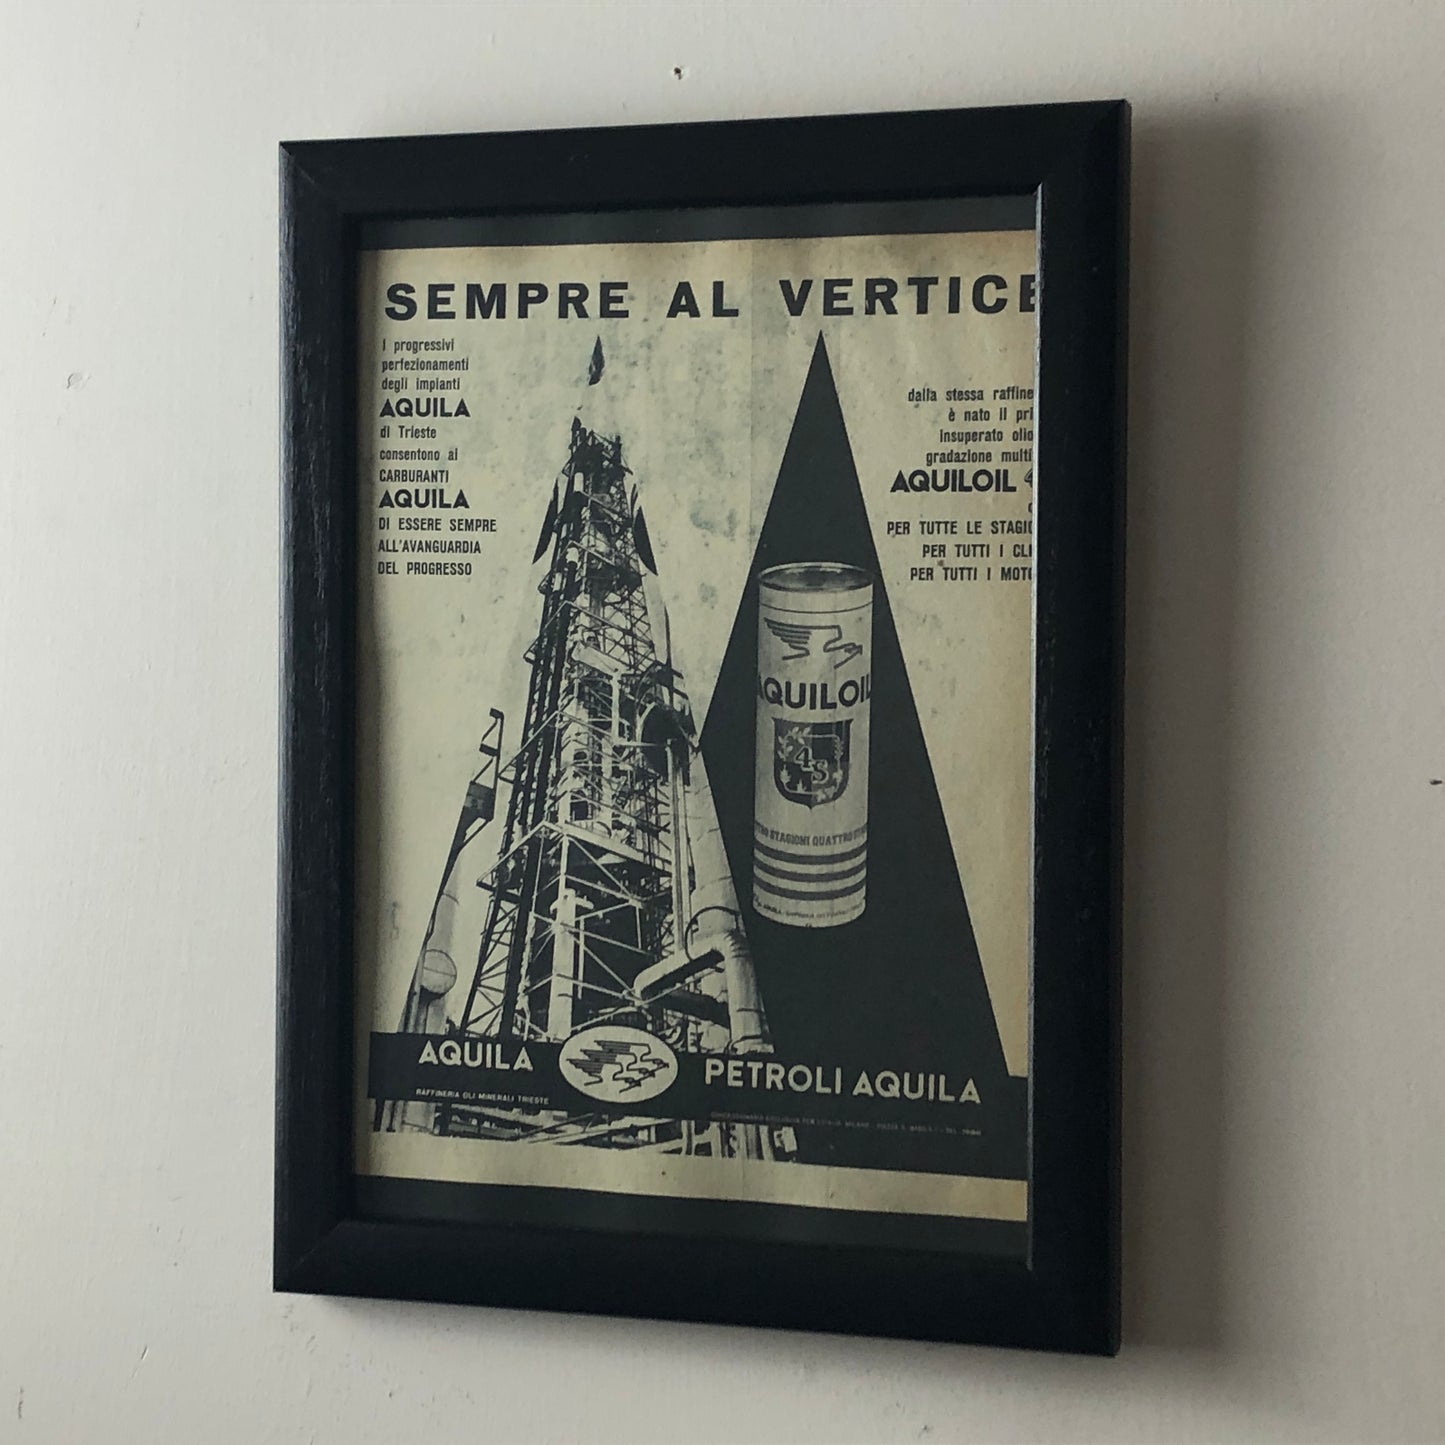 Aquila Mineral Oil Refinery Trieste, Advertising Year 1960 Aquiloil Petroli Aquila Always at the Top